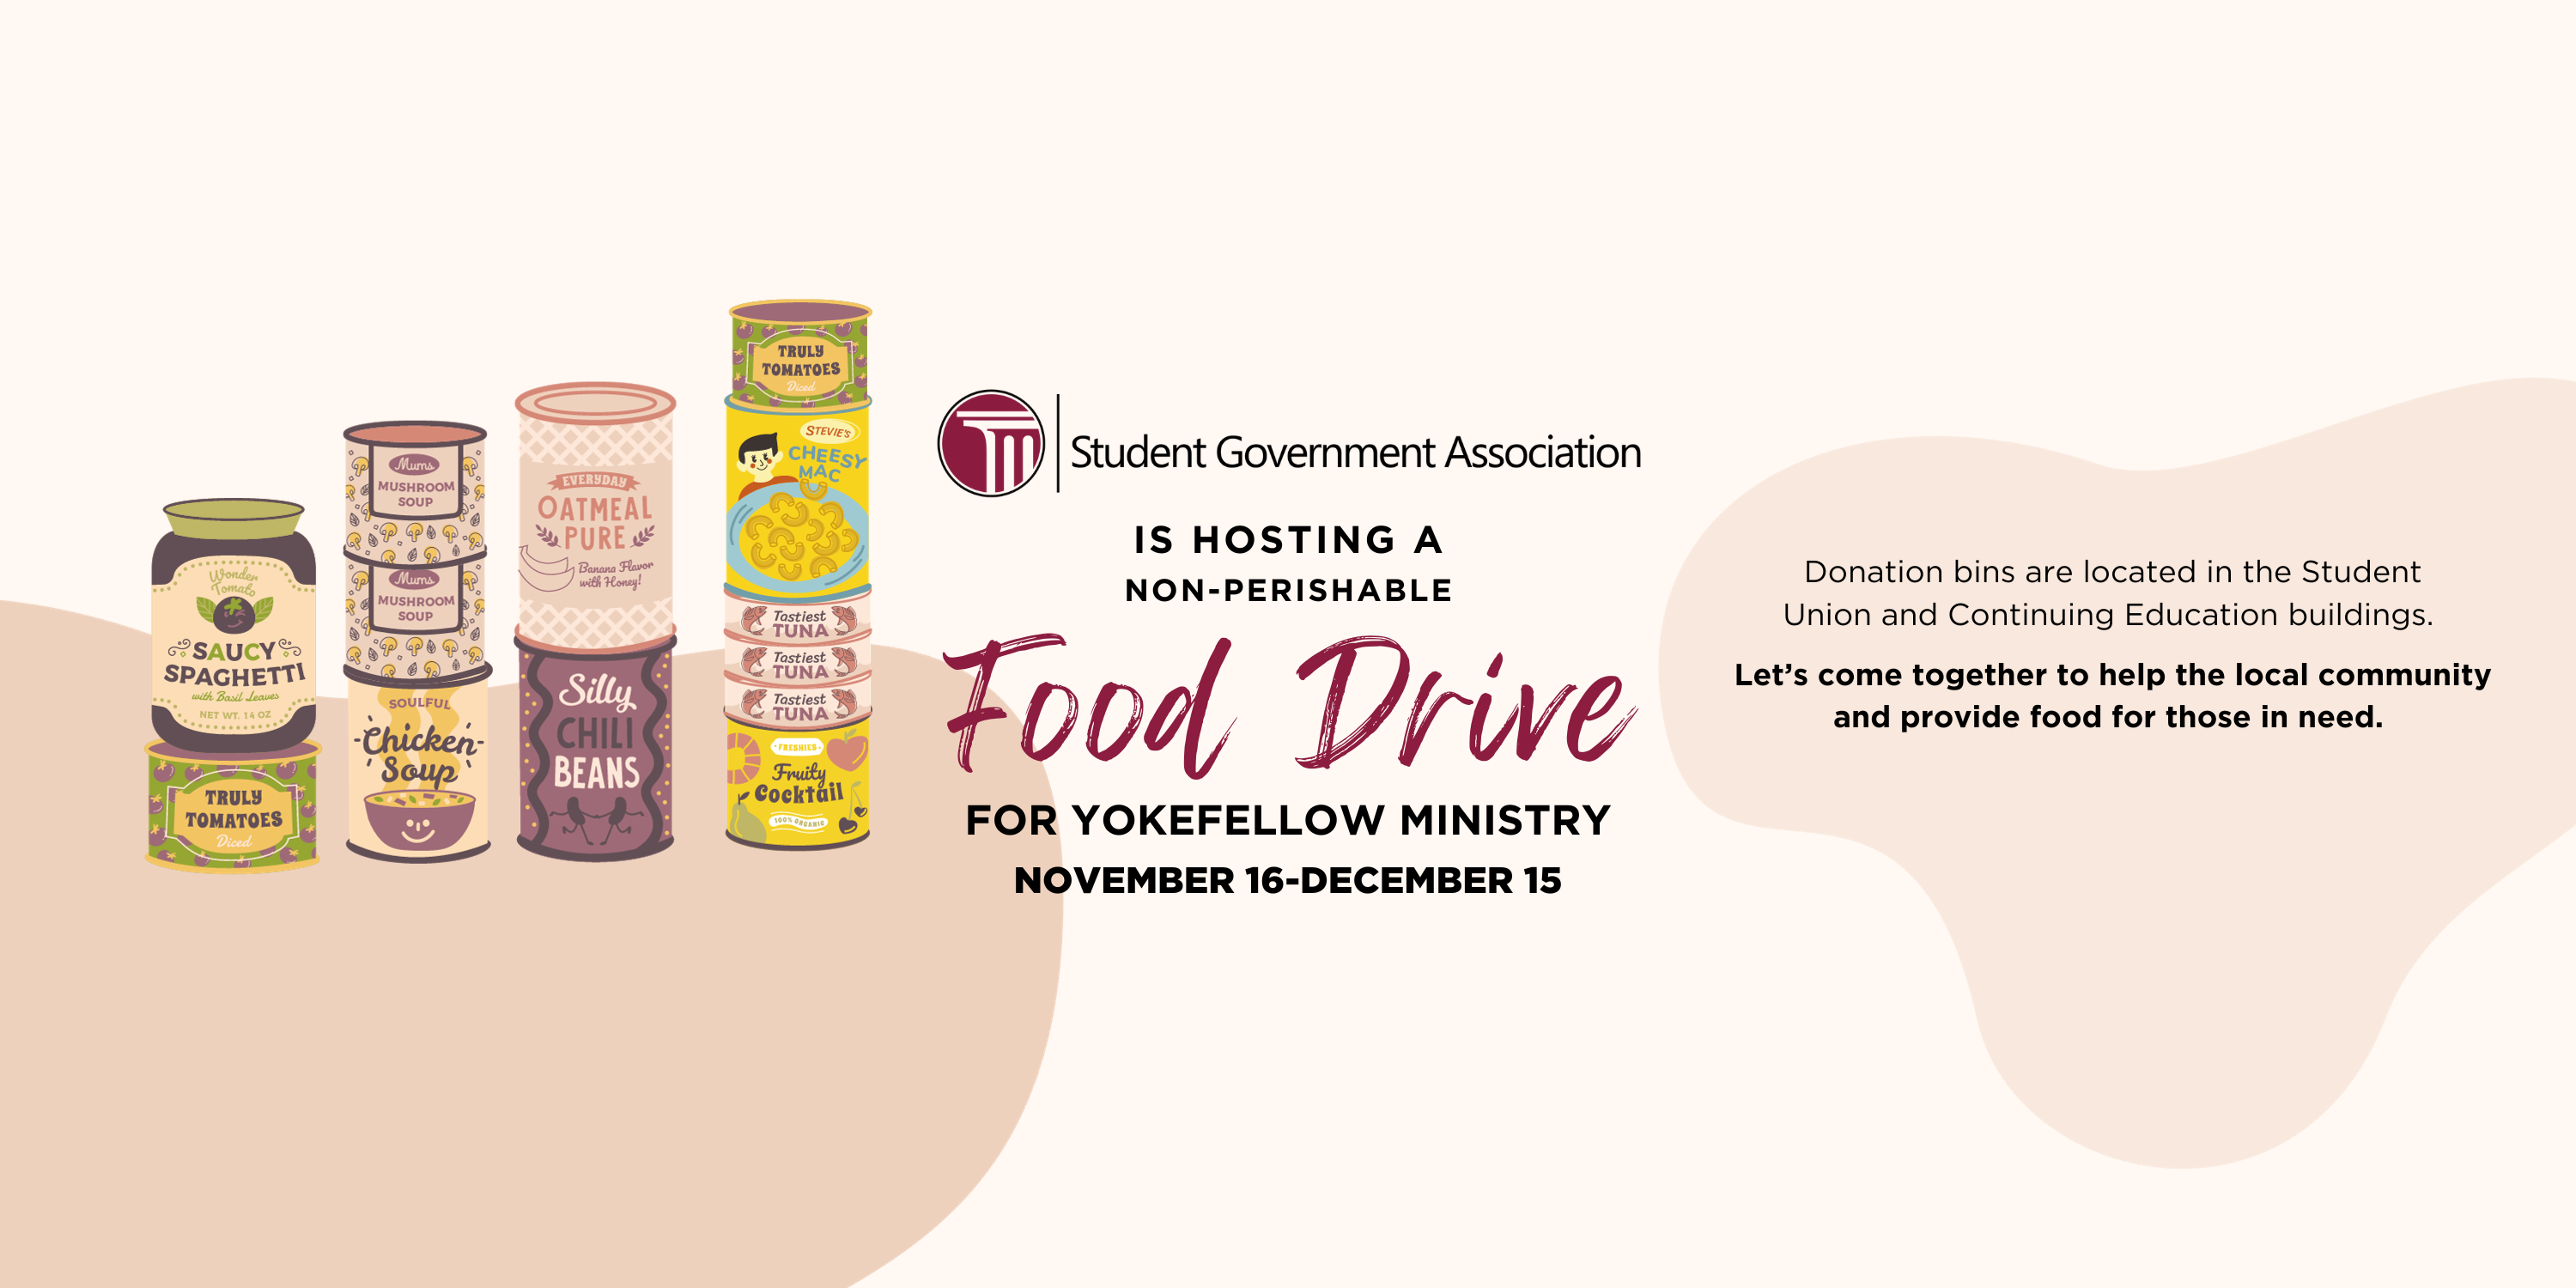 Banner that reads "Mitchell Community College's SGA is hosting a non-perishable food drive for Yokefellow Ministry | November16-December 15." Donation bins are located in the Student Union and Continuing Education buildings.